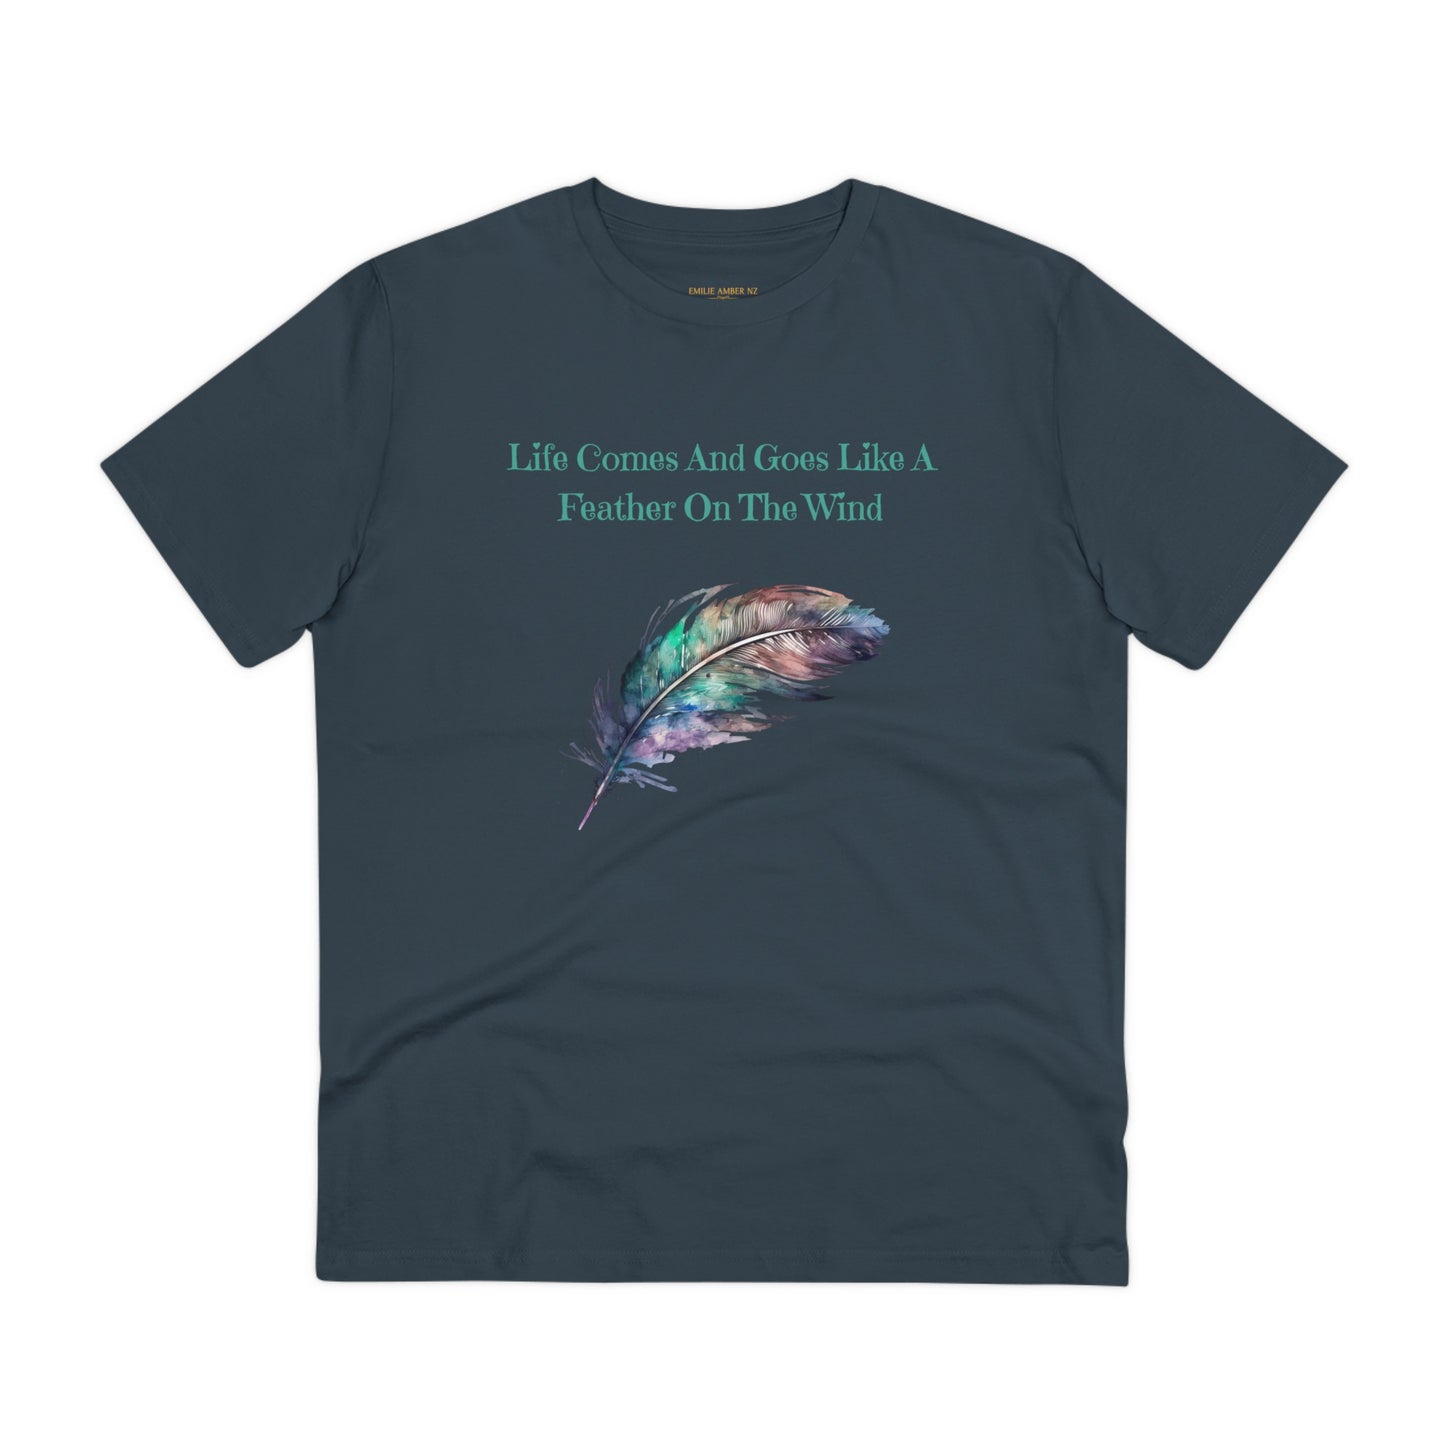 Feather On The Wind T-shirt